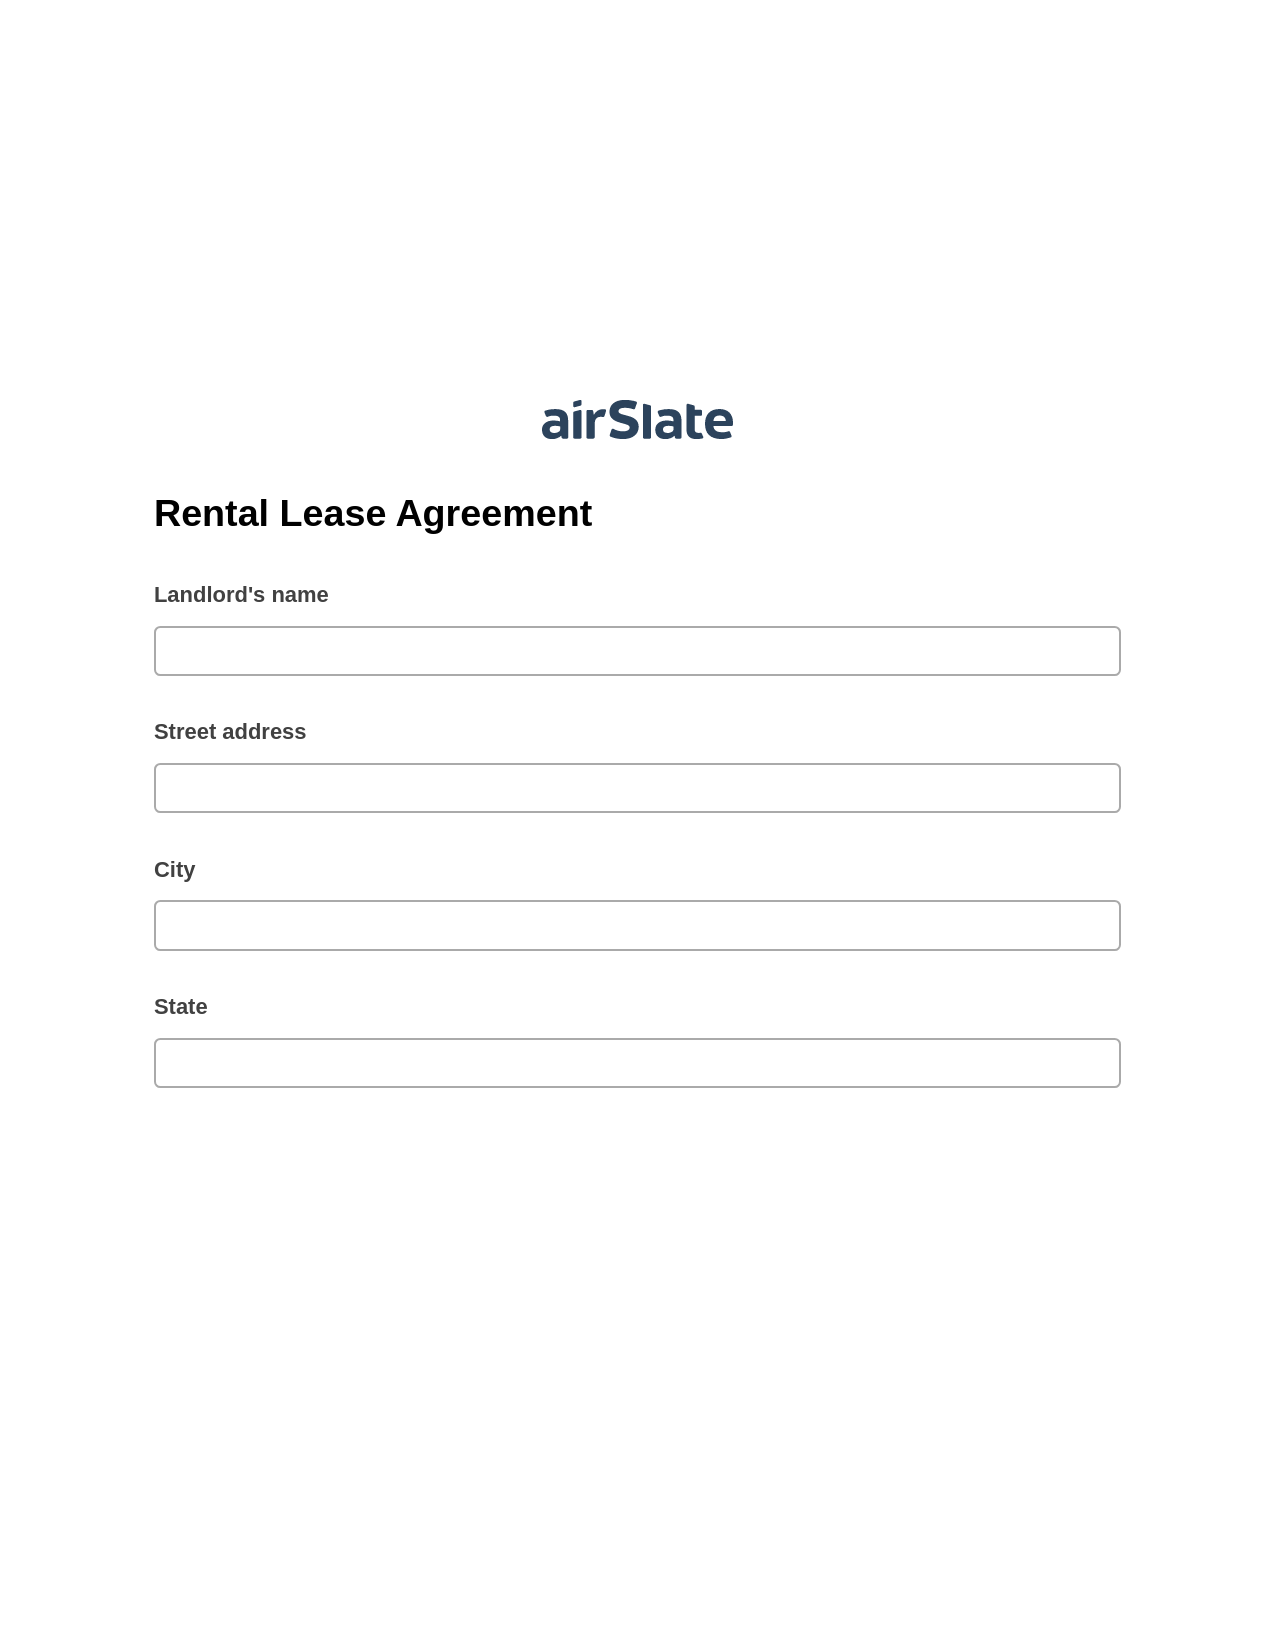 Multirole Rental Lease Agreement Pre-fill Slate from MS Dynamics 365 Records Bot, Assign Slate Name Bot, Export to Excel 365 Bot